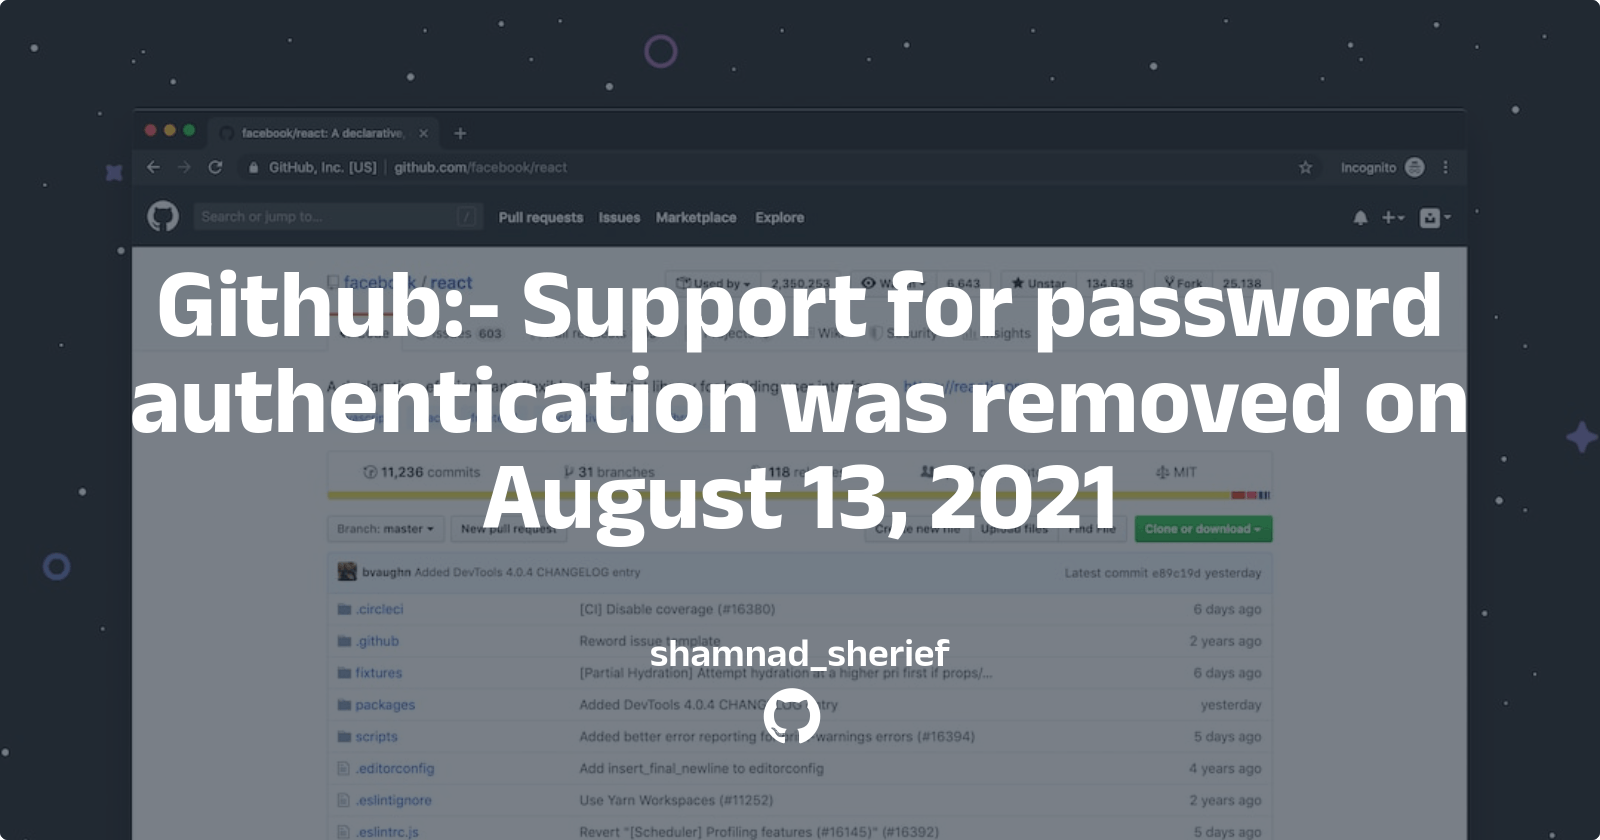 Solving the Git Error: "Support for password authentication was removed on August 13, 2021"